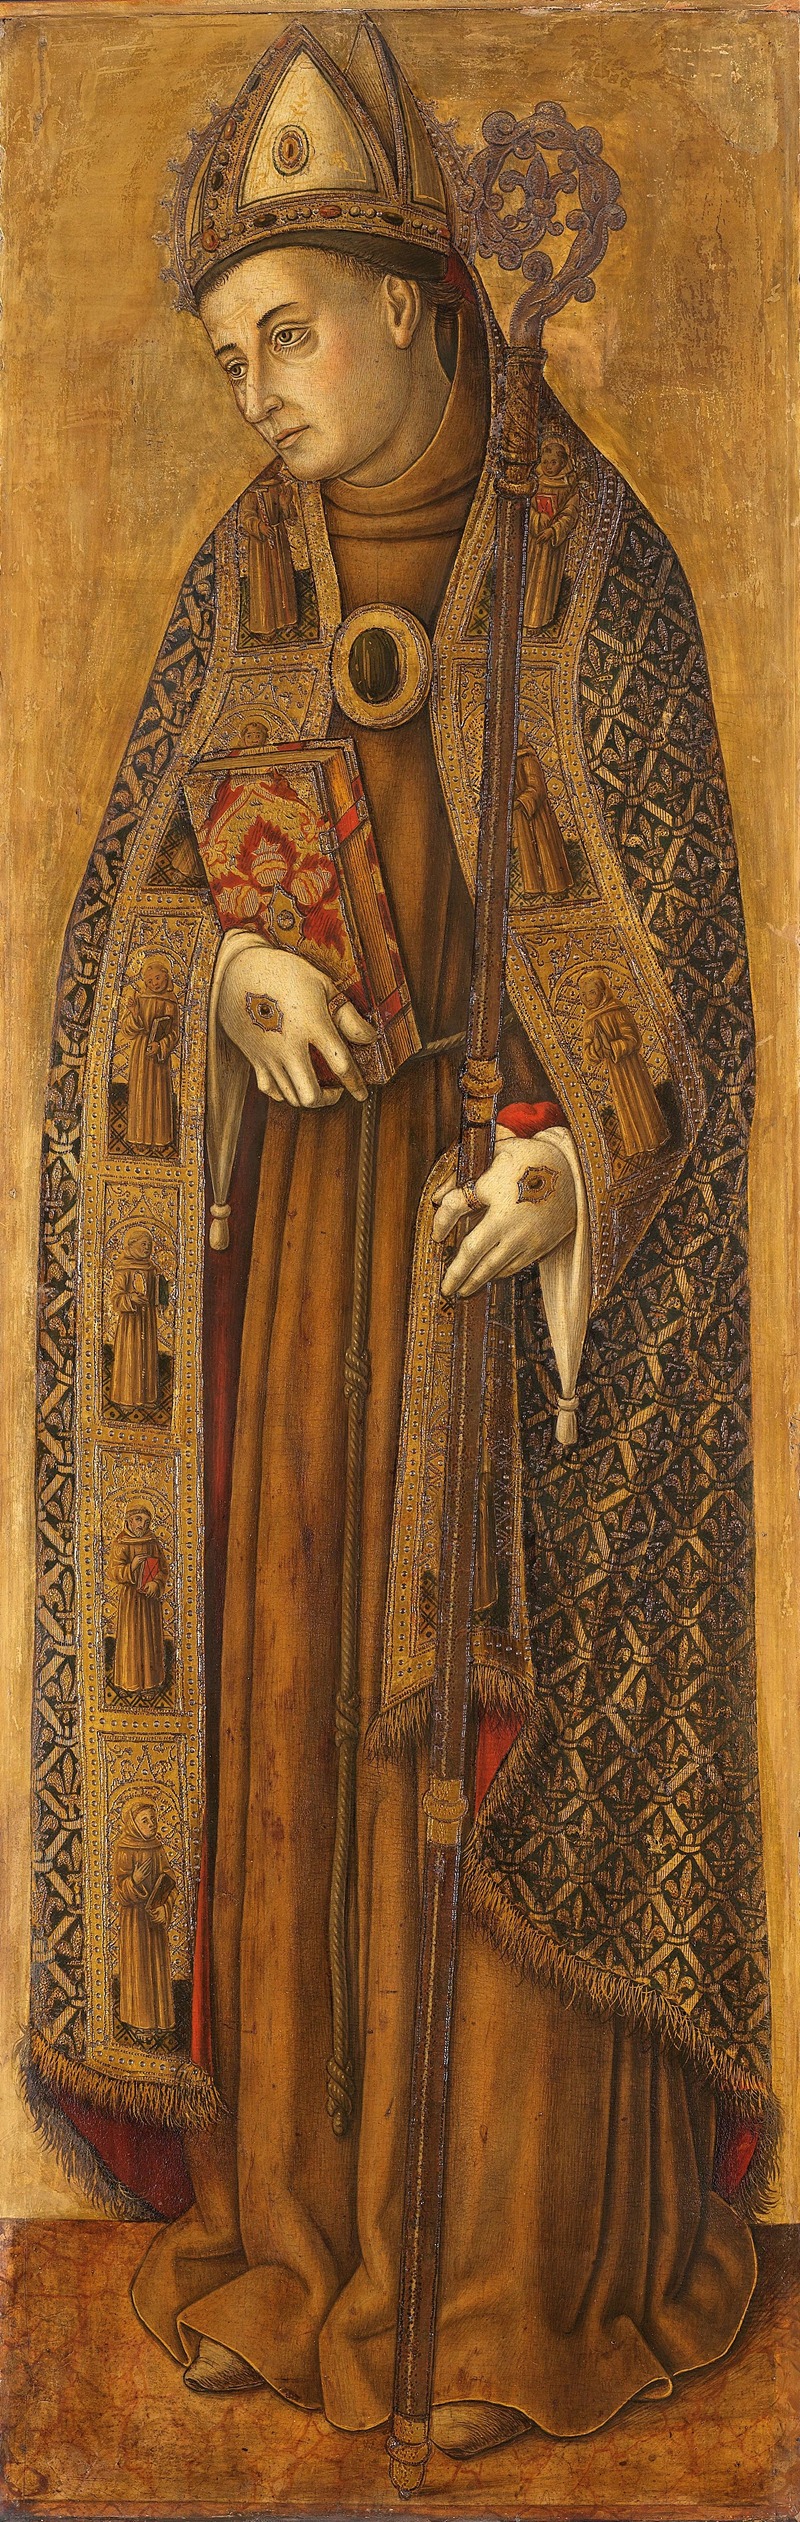 Vittore Crivelli - St Louis of France